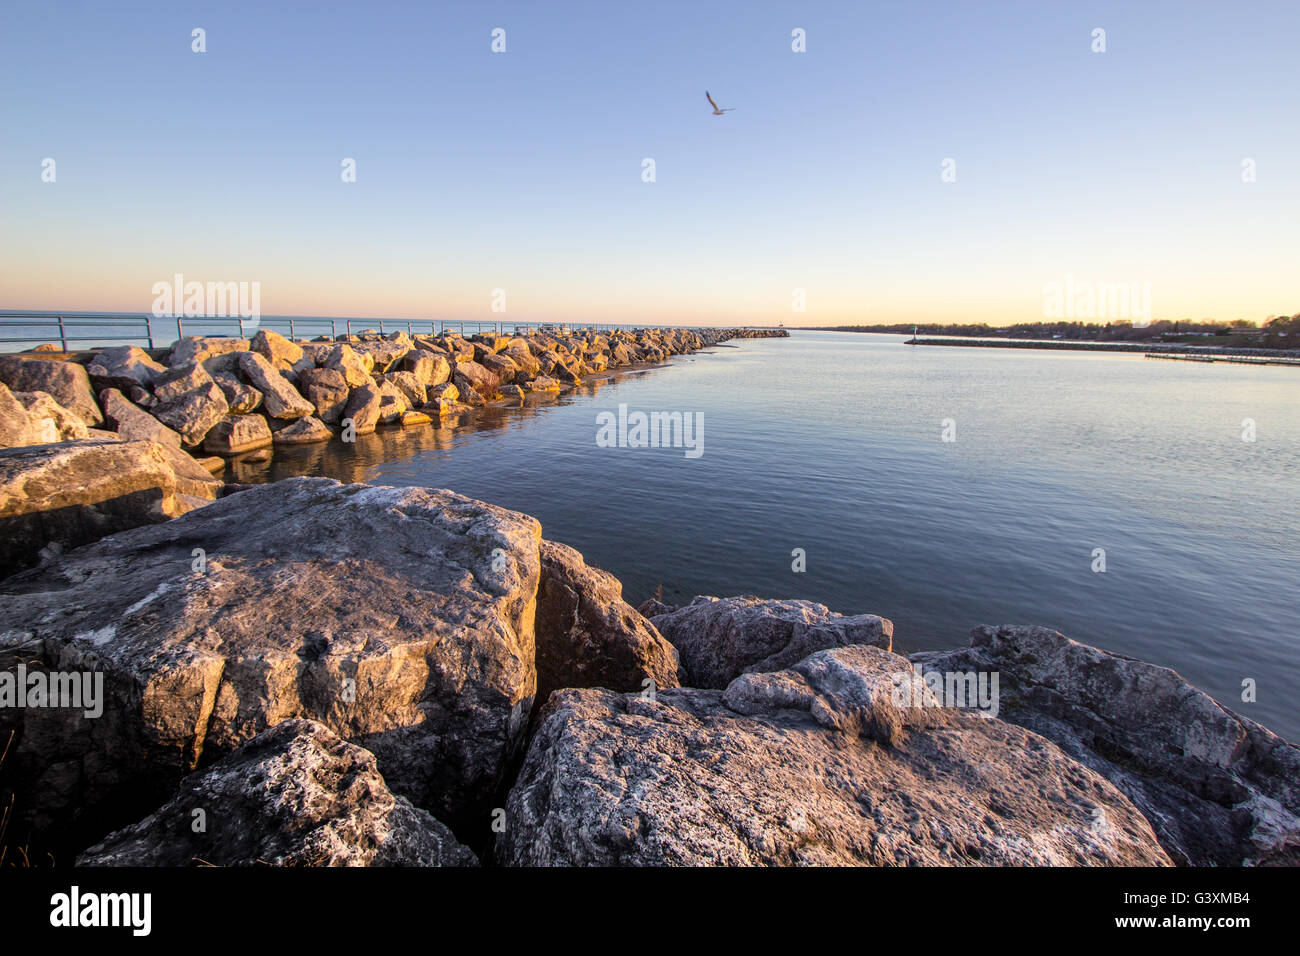 Summer Stroll On The Coast. Harbor break wall along the shores of the Great Lakes on a warm summer evening. Lexington, Michigan Stock Photo